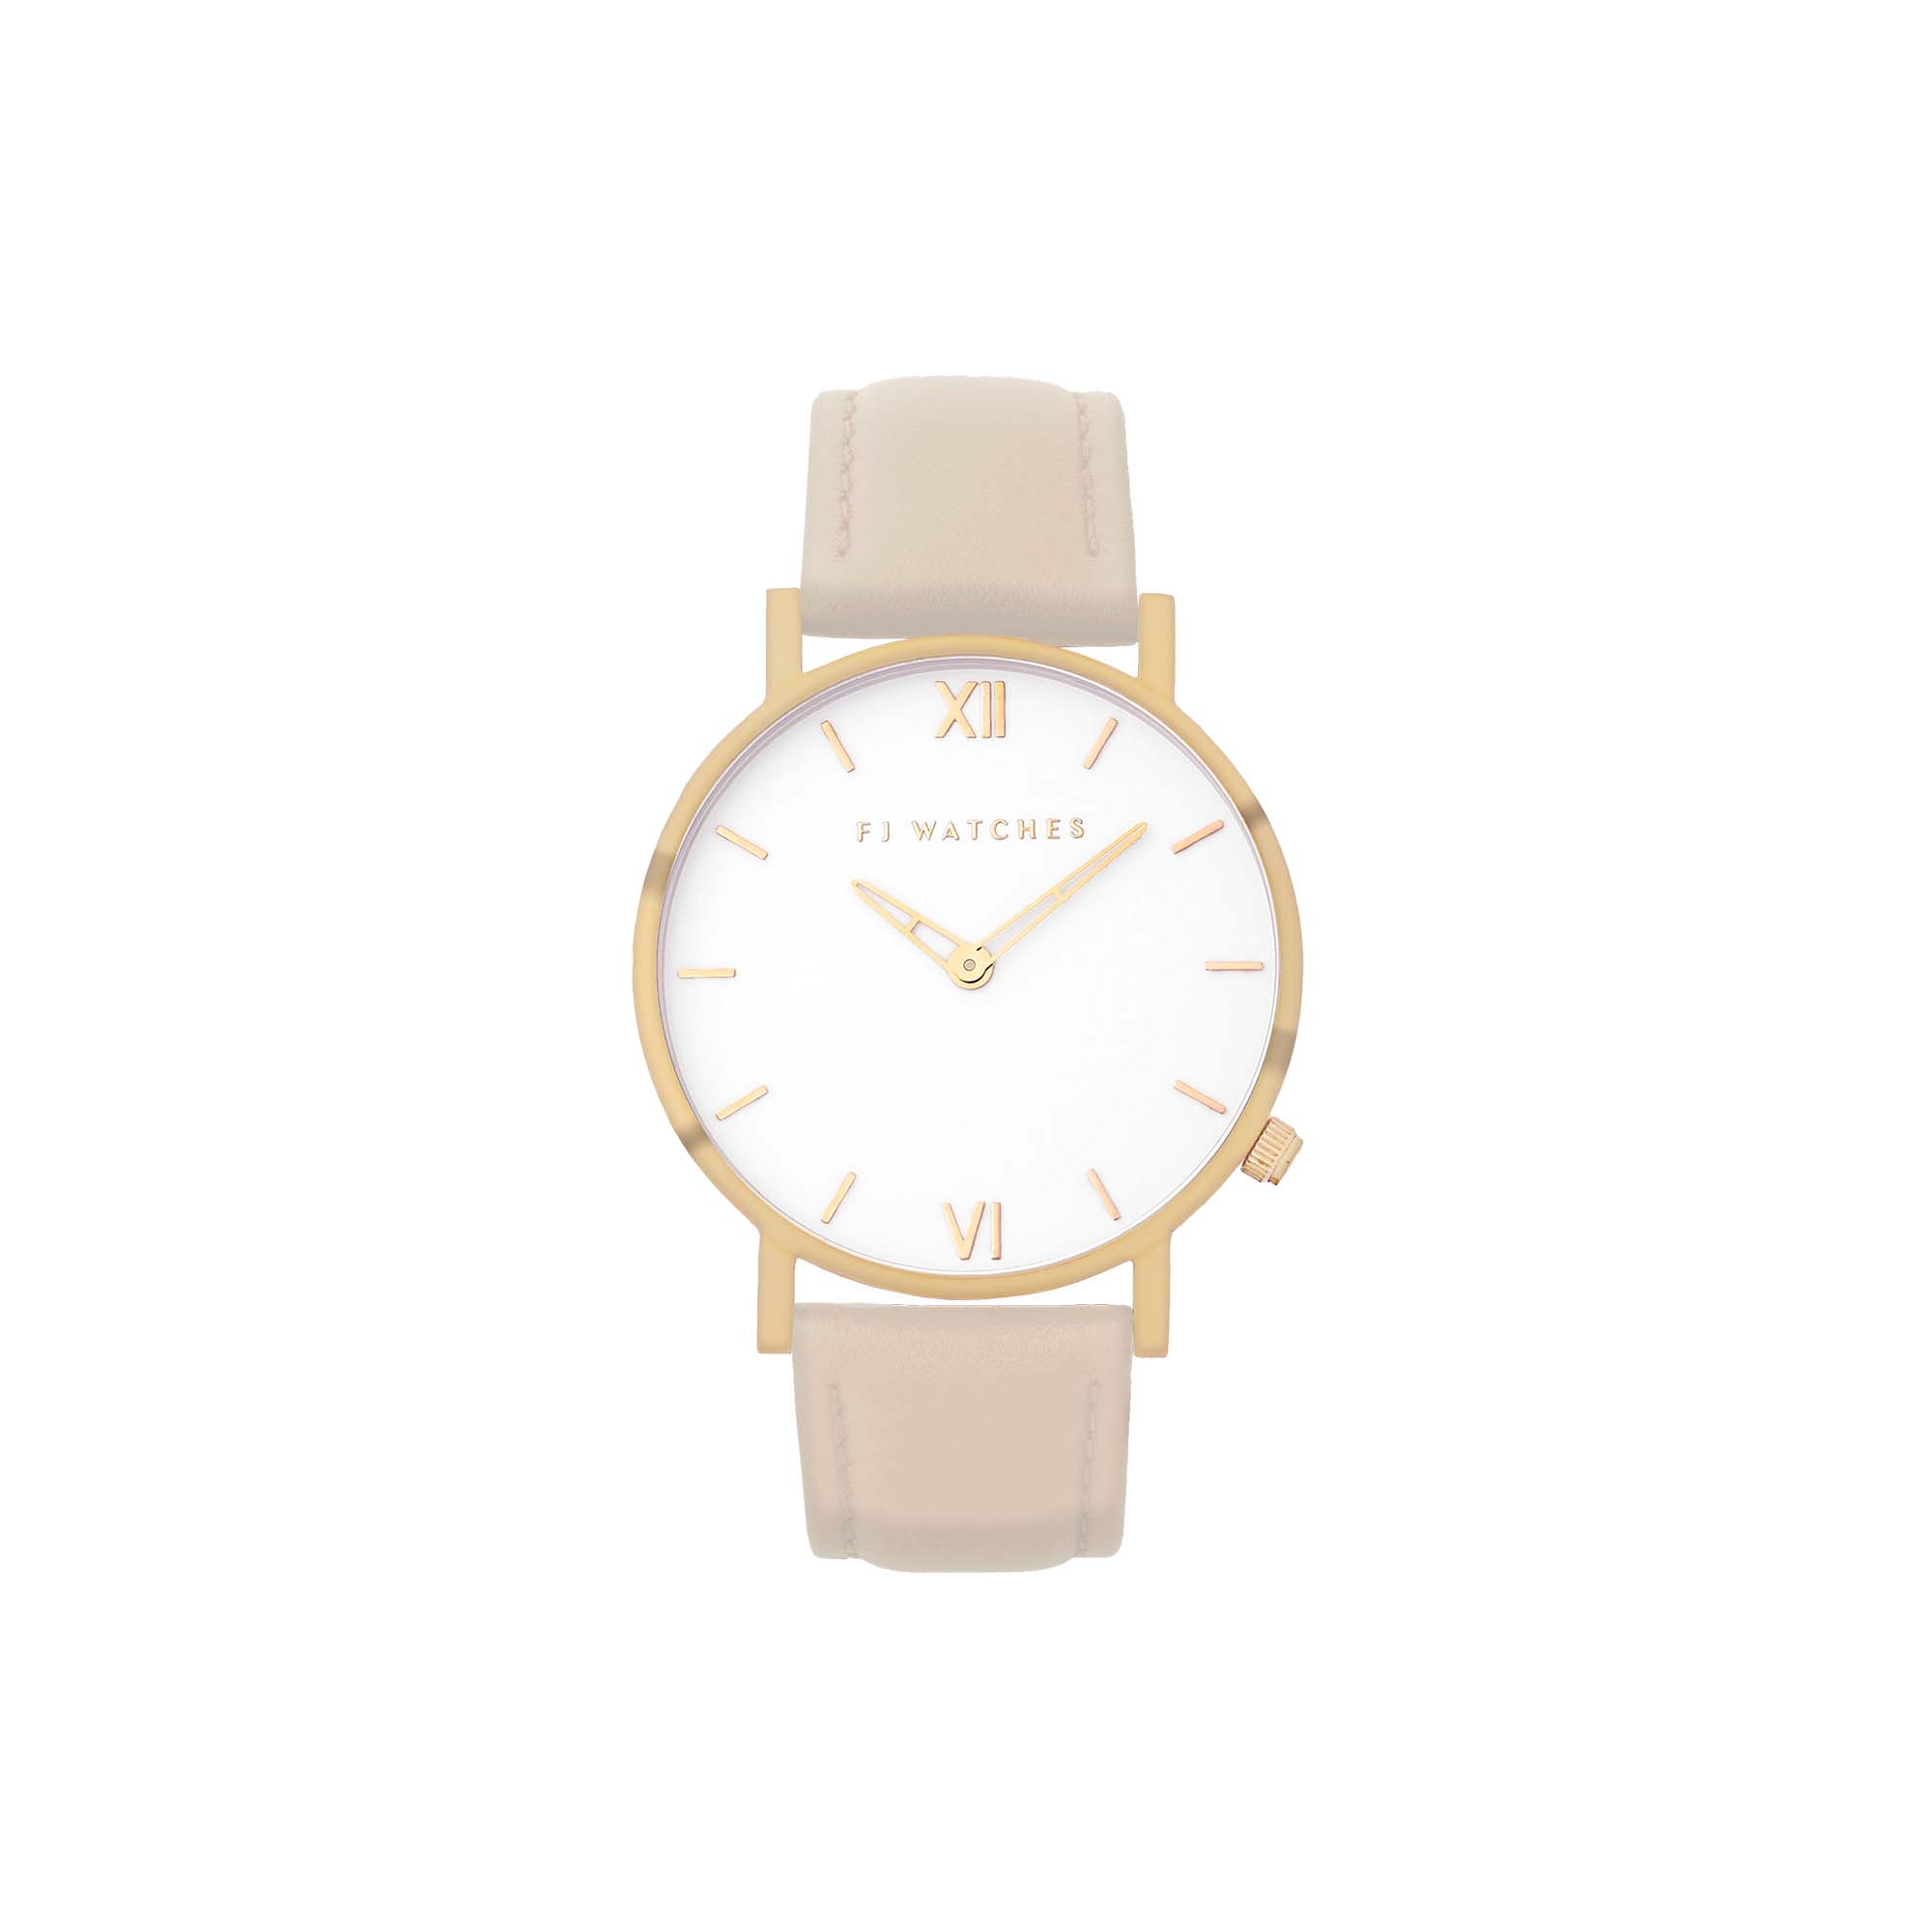 Discover Sunlight, a 36mm women's watch in gold and white signed Five Jwlry. This one is accompanied by beige leather bracelet.